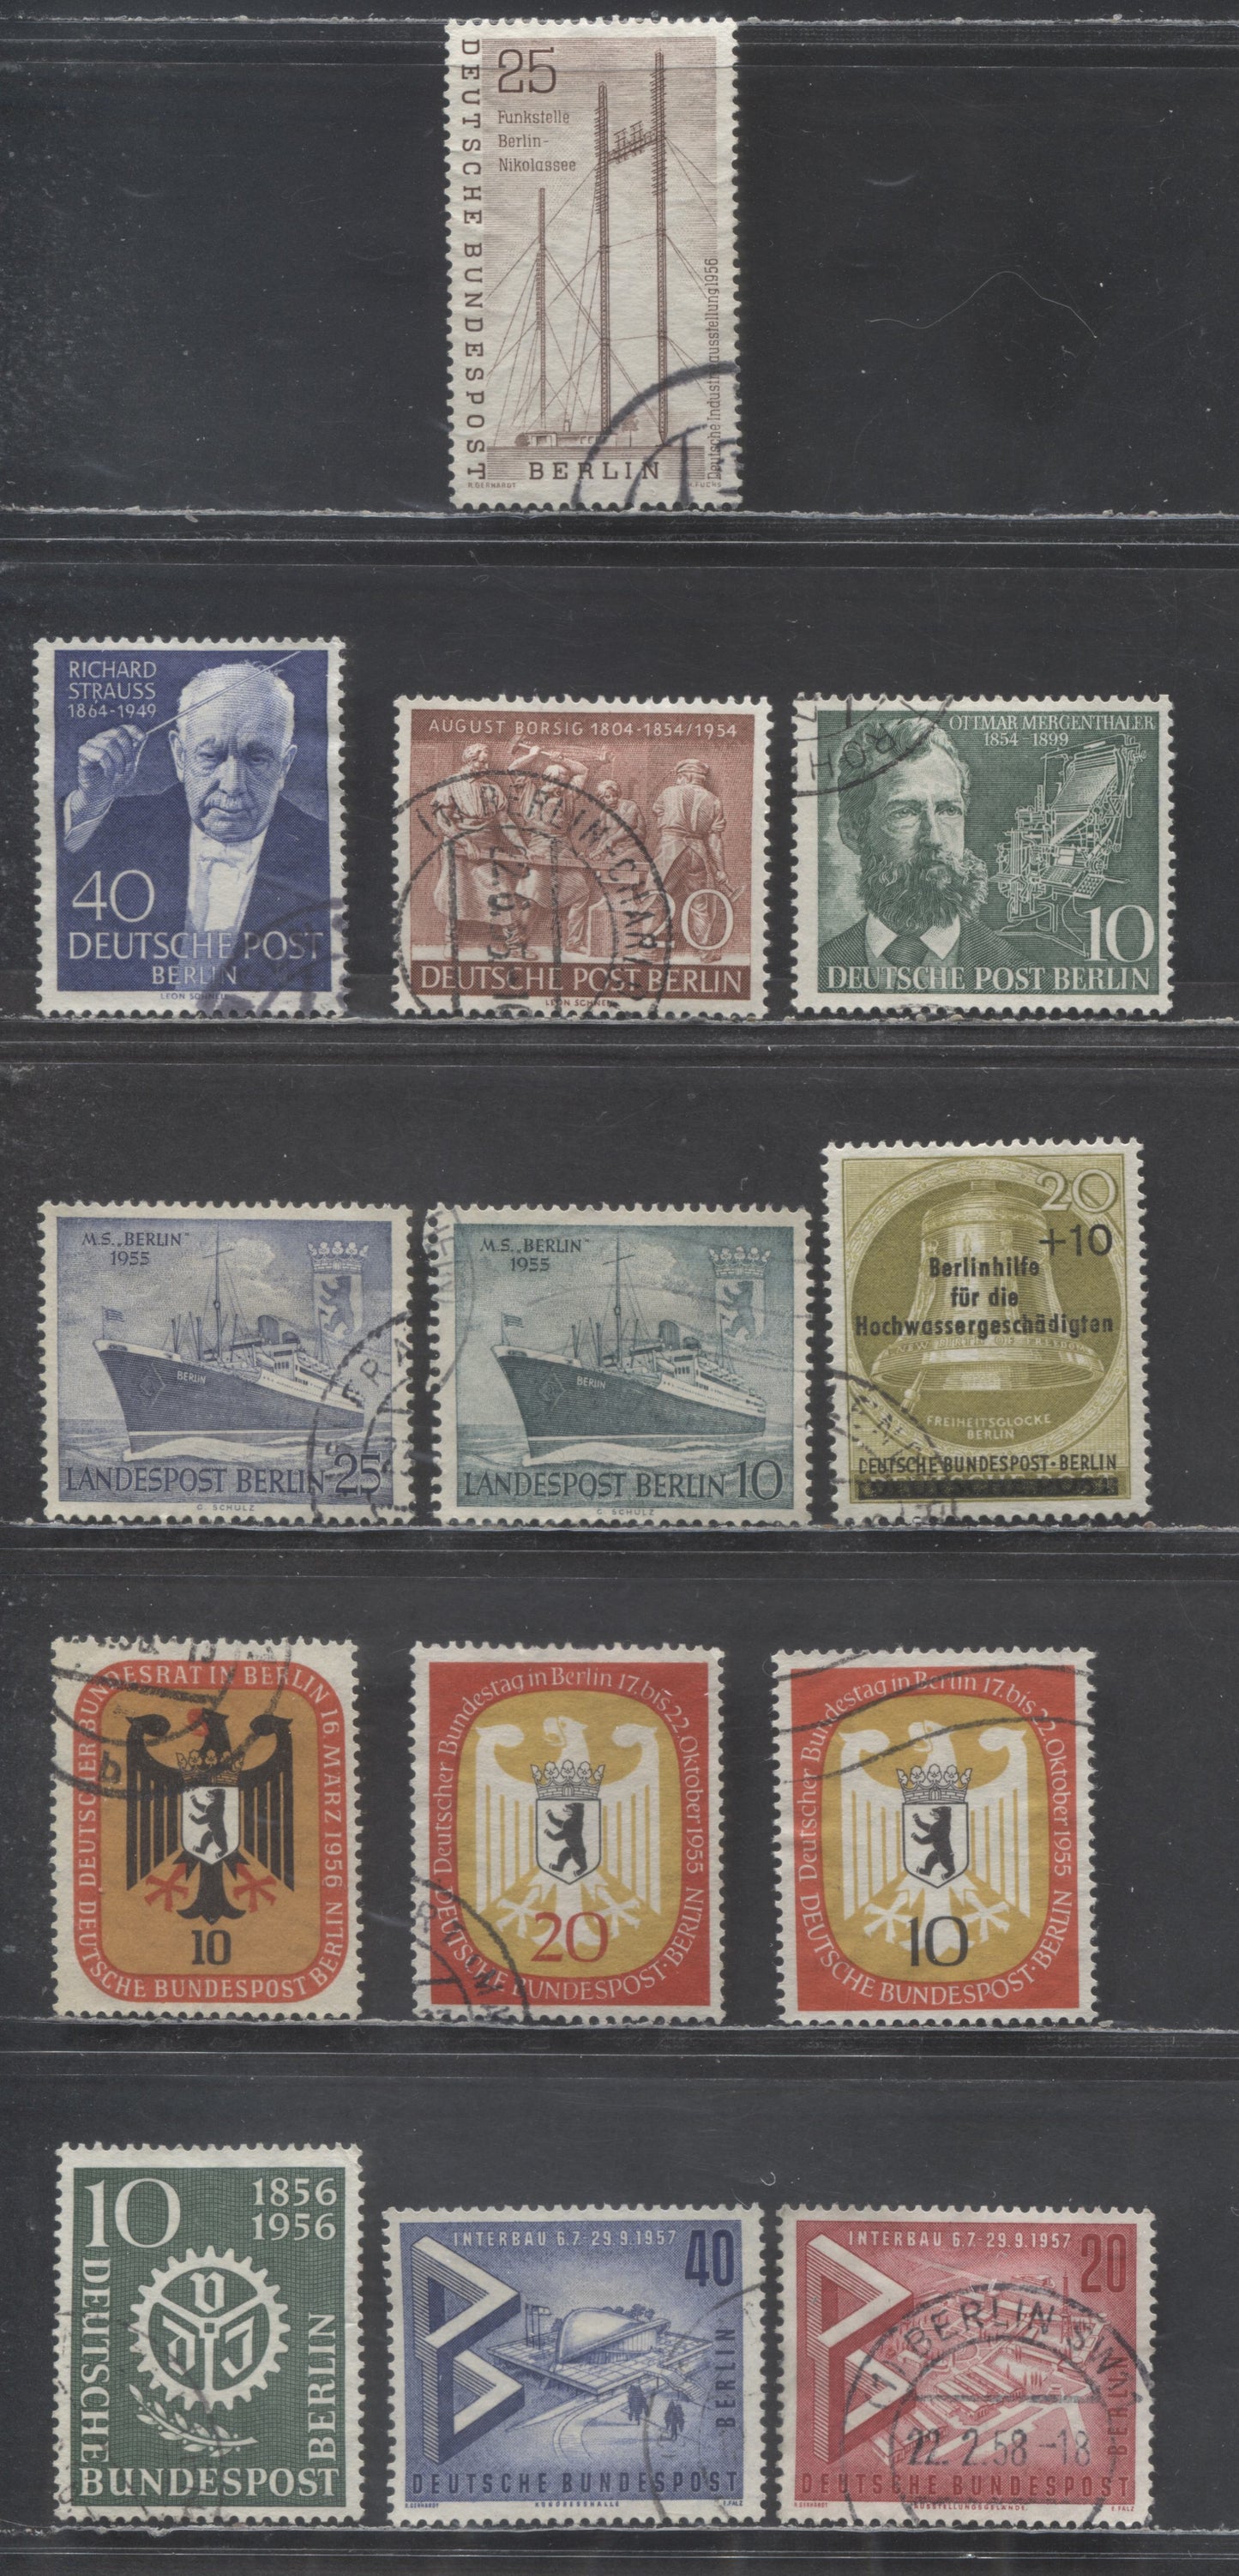 Lot 45 Germany - Berlin SC#9N105/9NB117 1954 Ottmar Mergenthaller - International Building Show Berlin Issues, 13 Fine/Very Fine Used Singles, Click on Listing to See ALL Pictures, Estimated Value $25